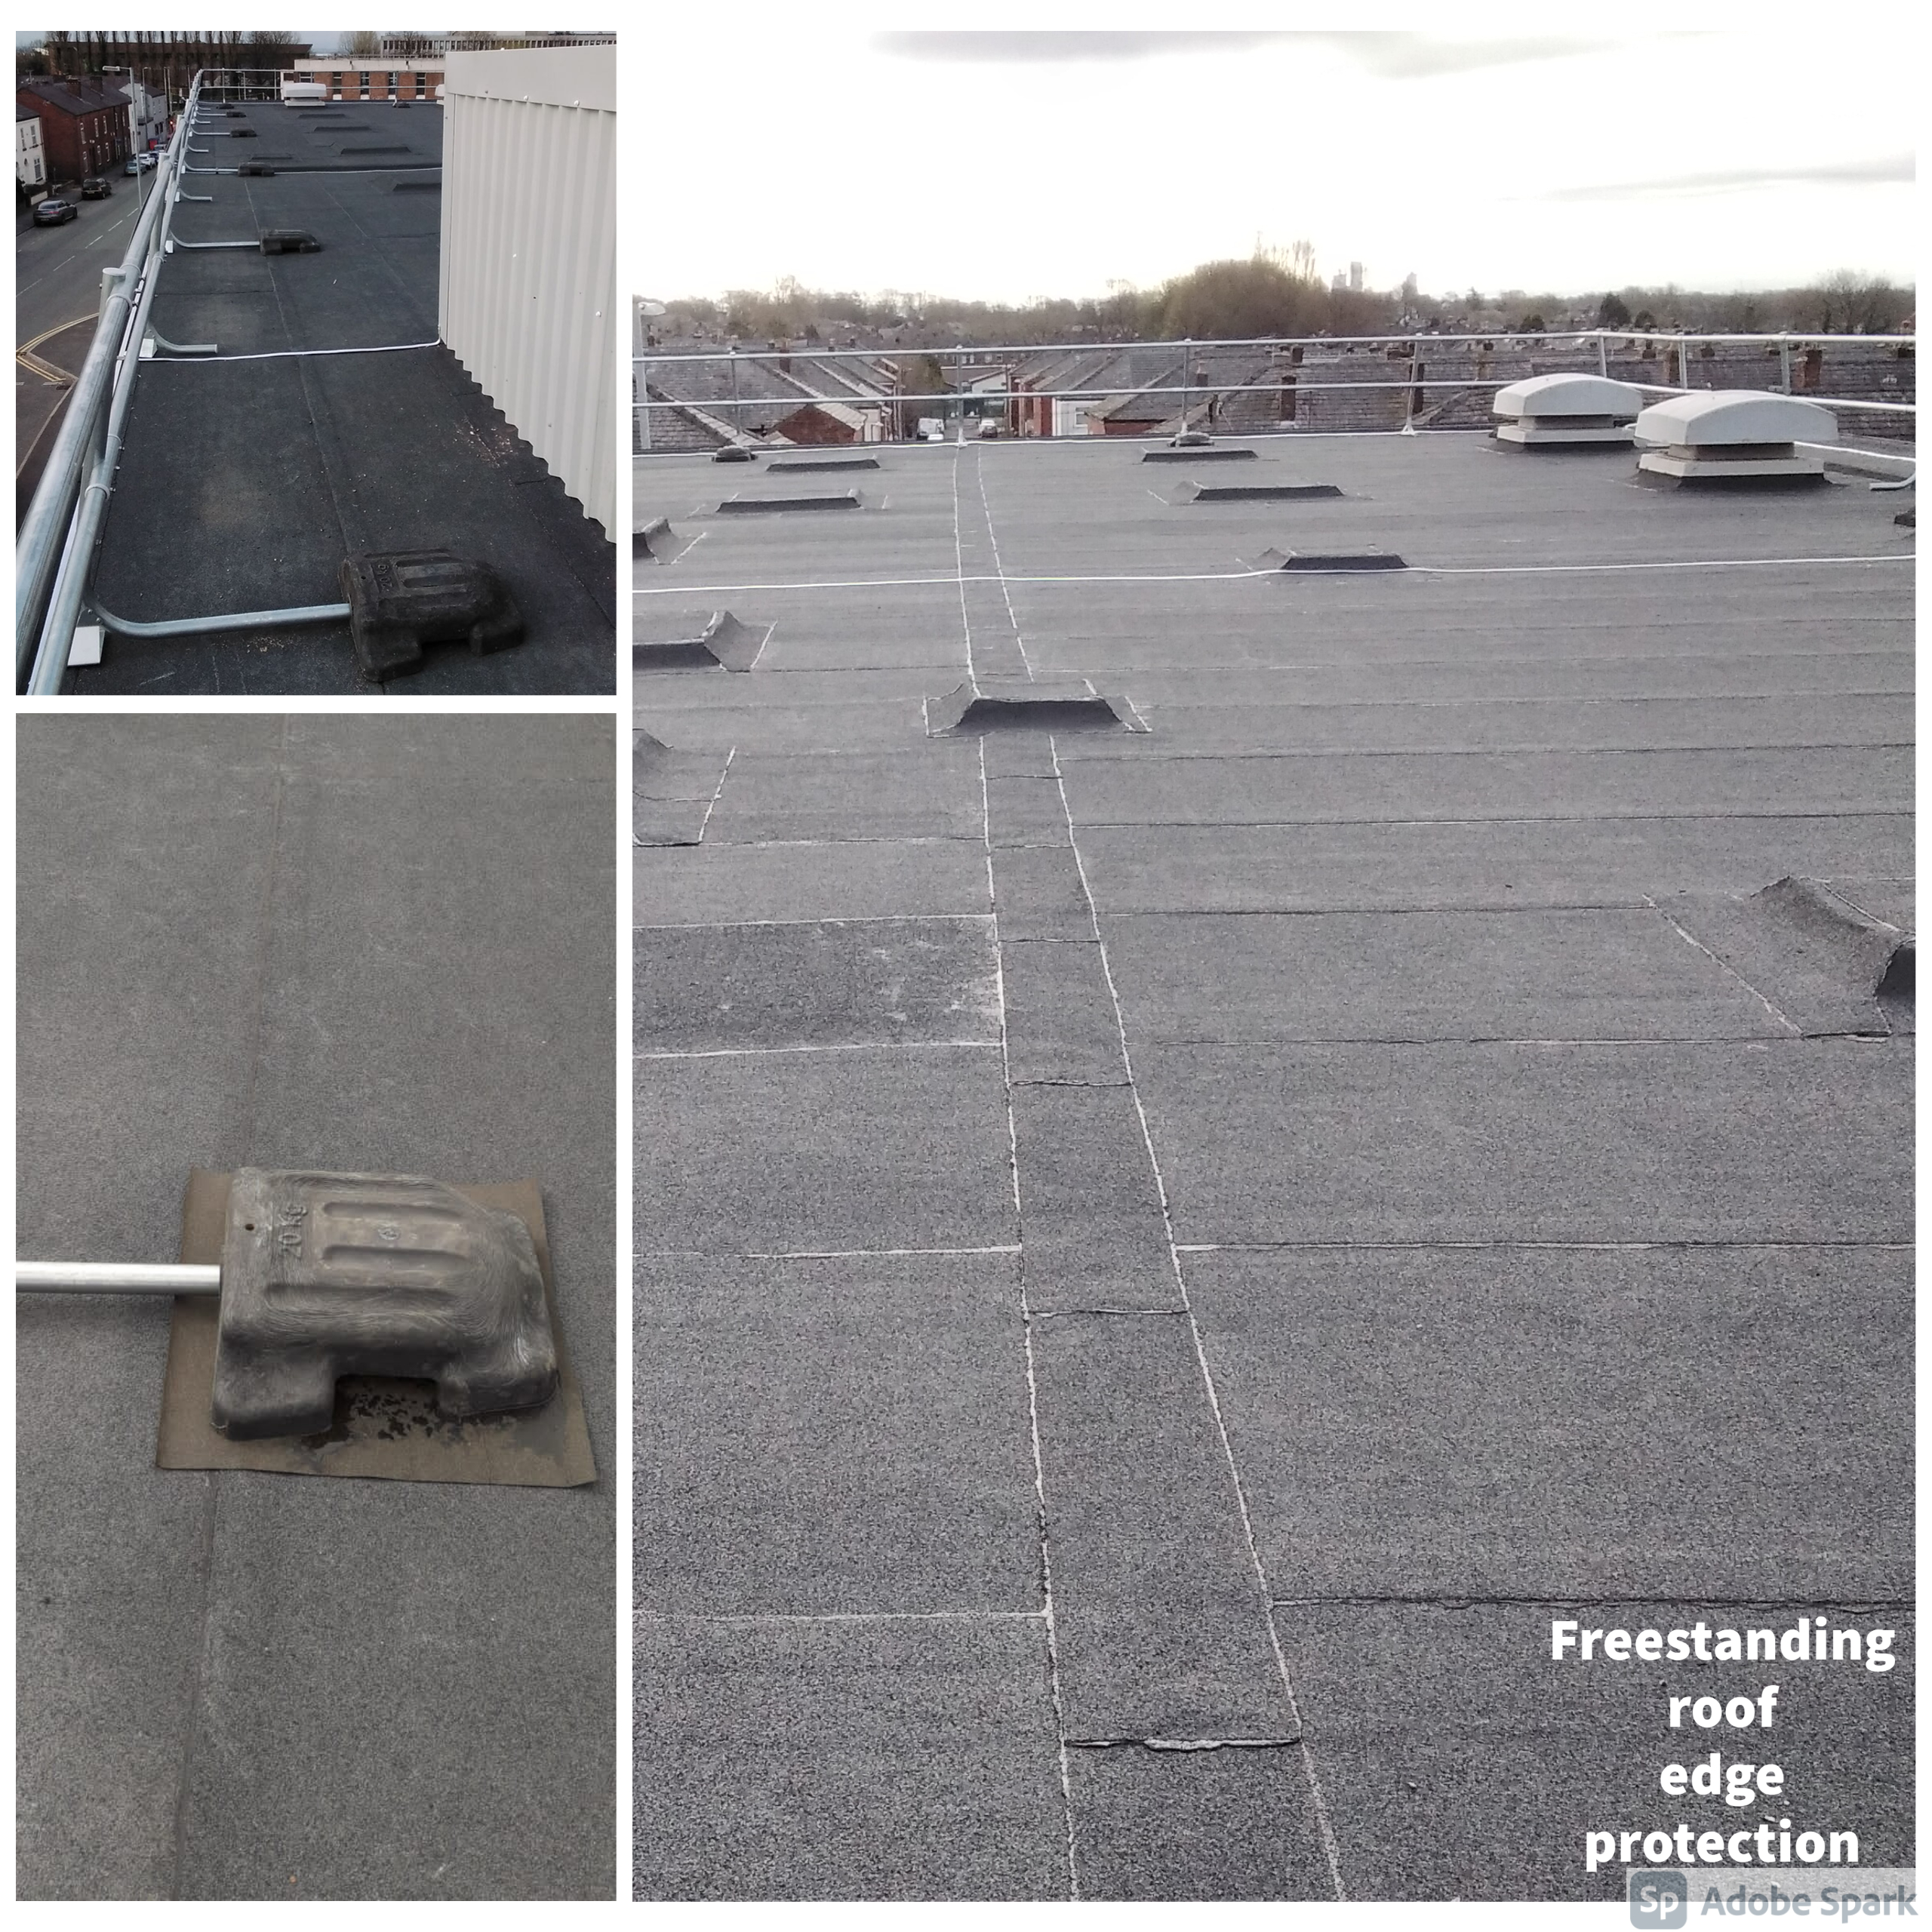 Freestanding roof edge protection